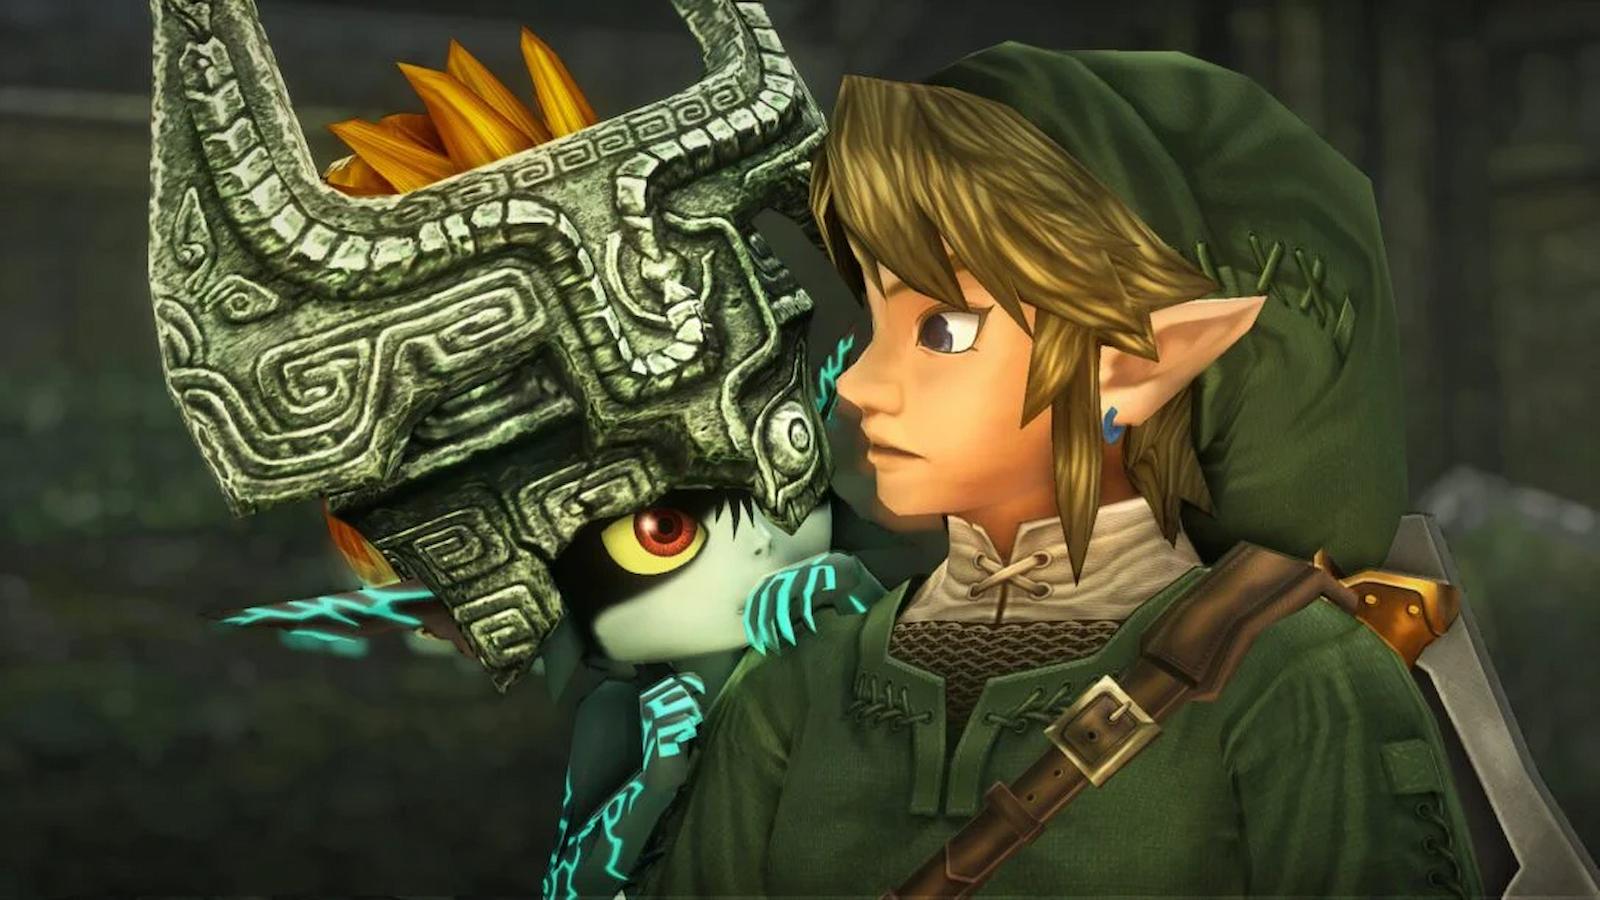 Link in Twilight Princess with Midna